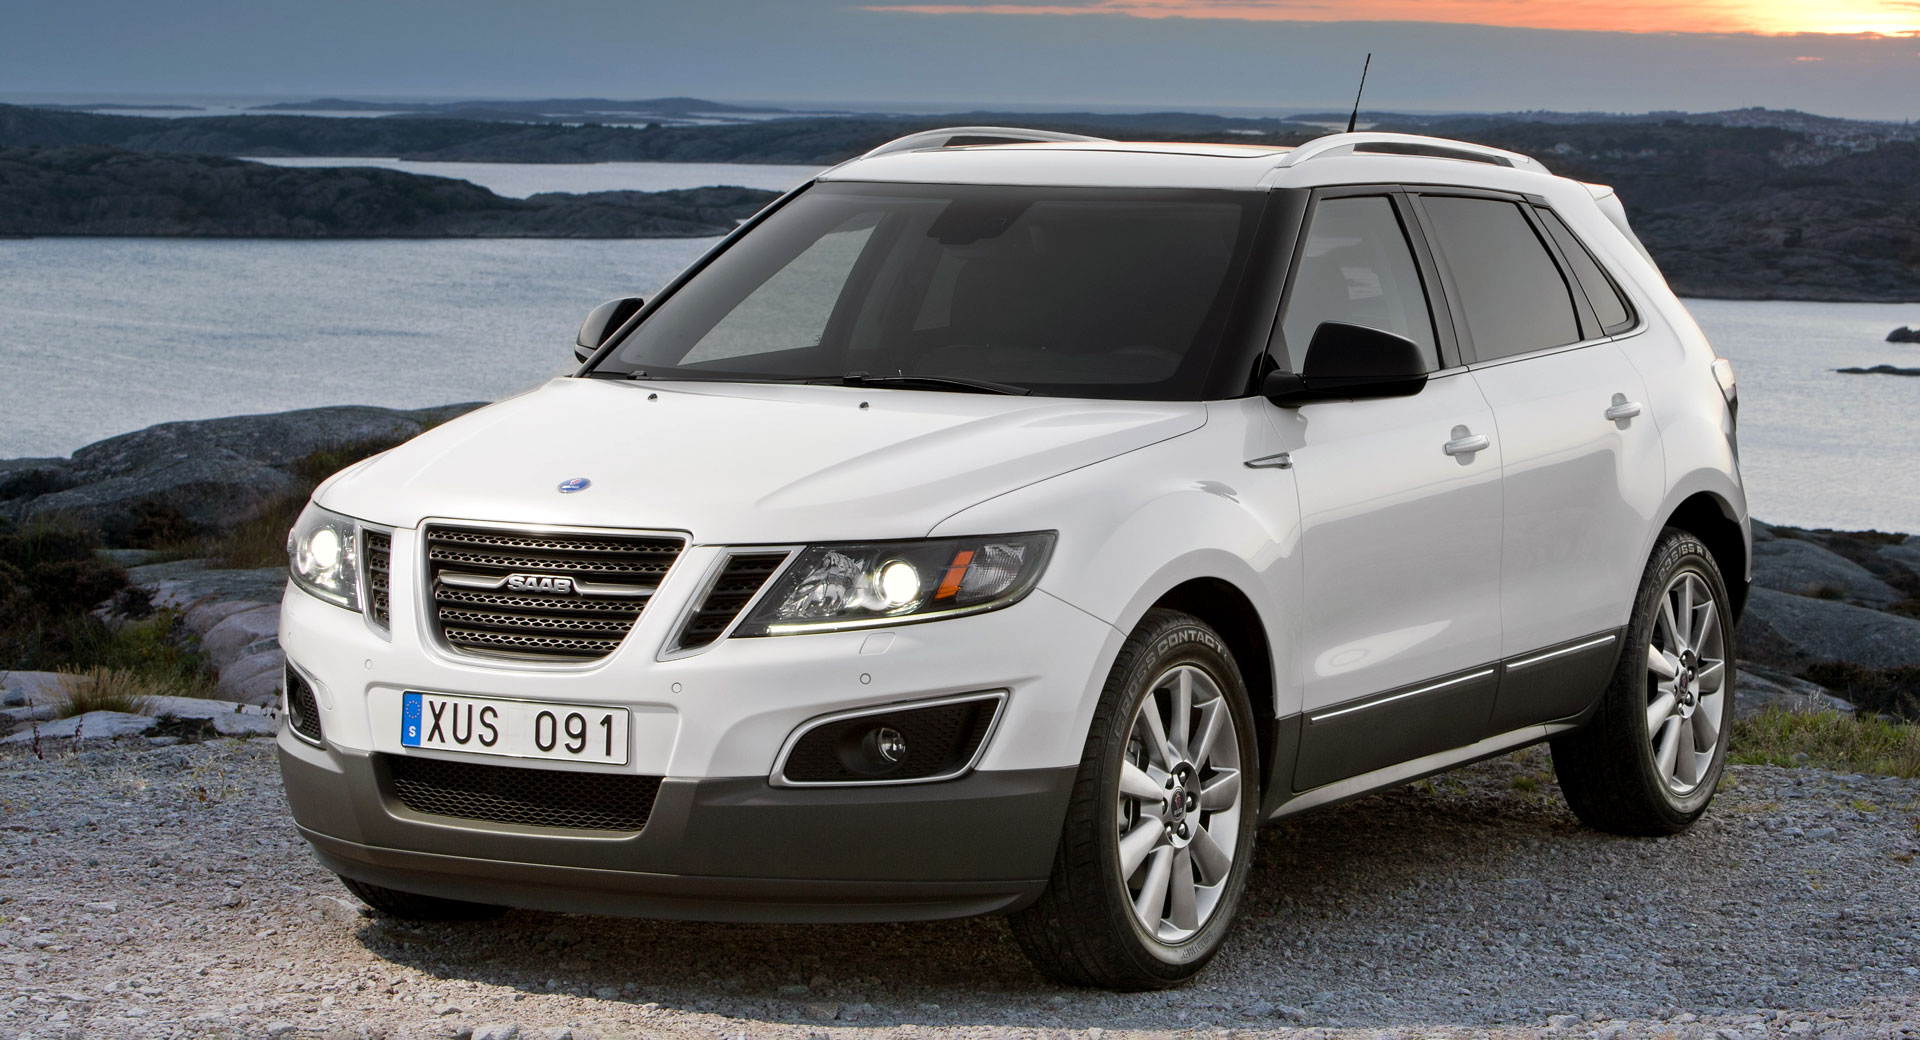 Remember The Saab 9-4X? It's Being Recalled Together With The Cadillac SRX  | Carscoops